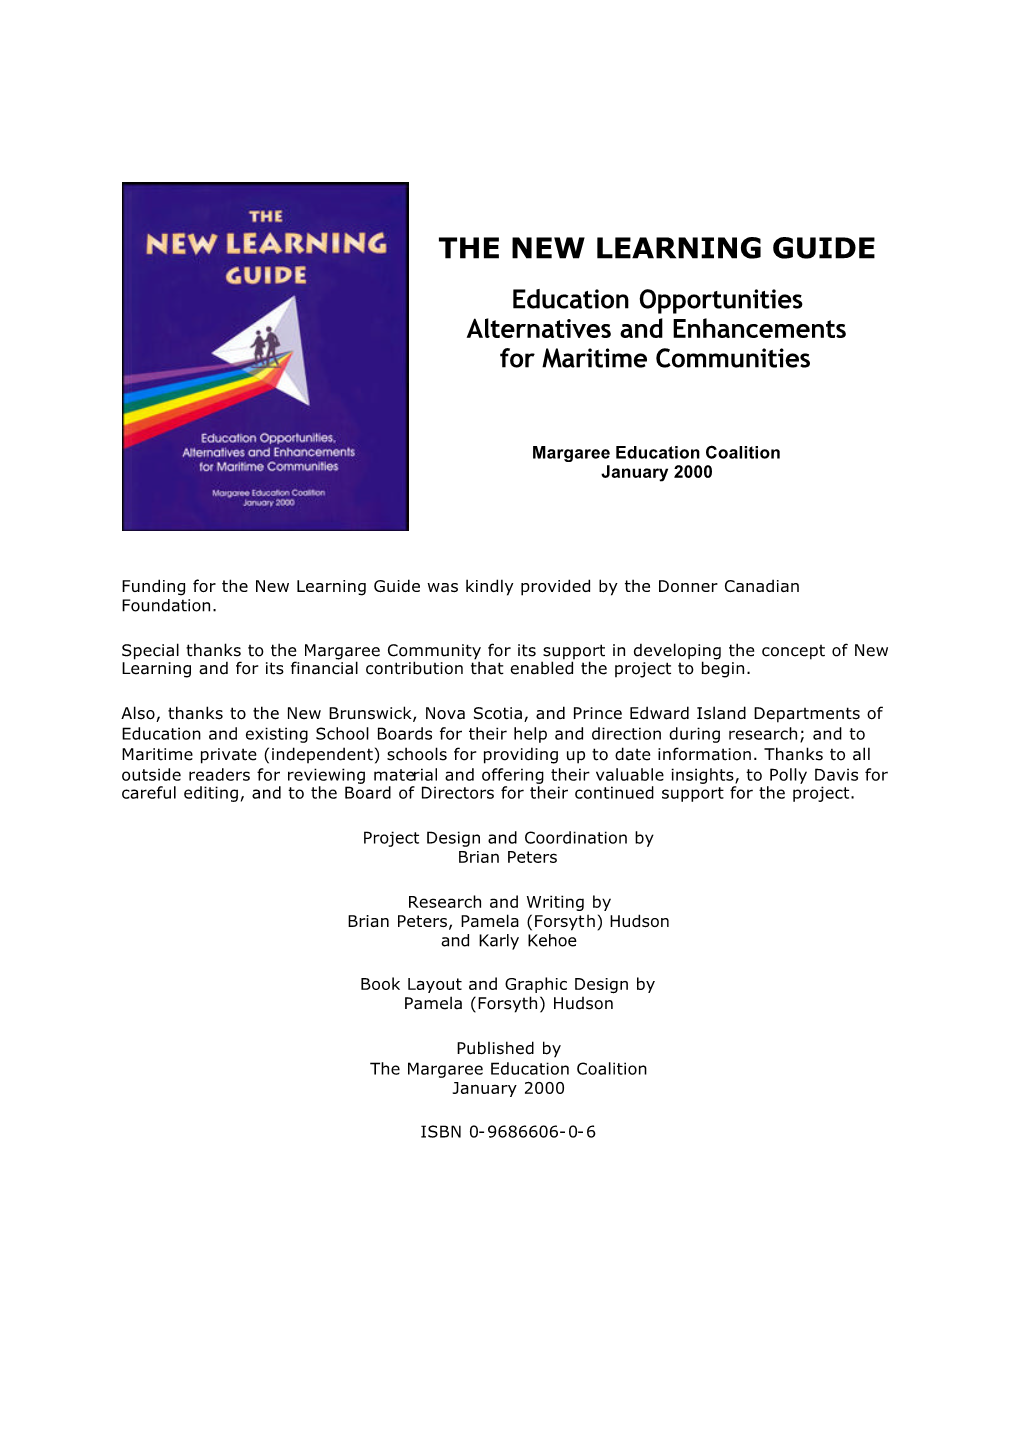 THE NEW LEARNING GUIDE Education Opportunities Alternatives and Enhancements for Maritime Communities